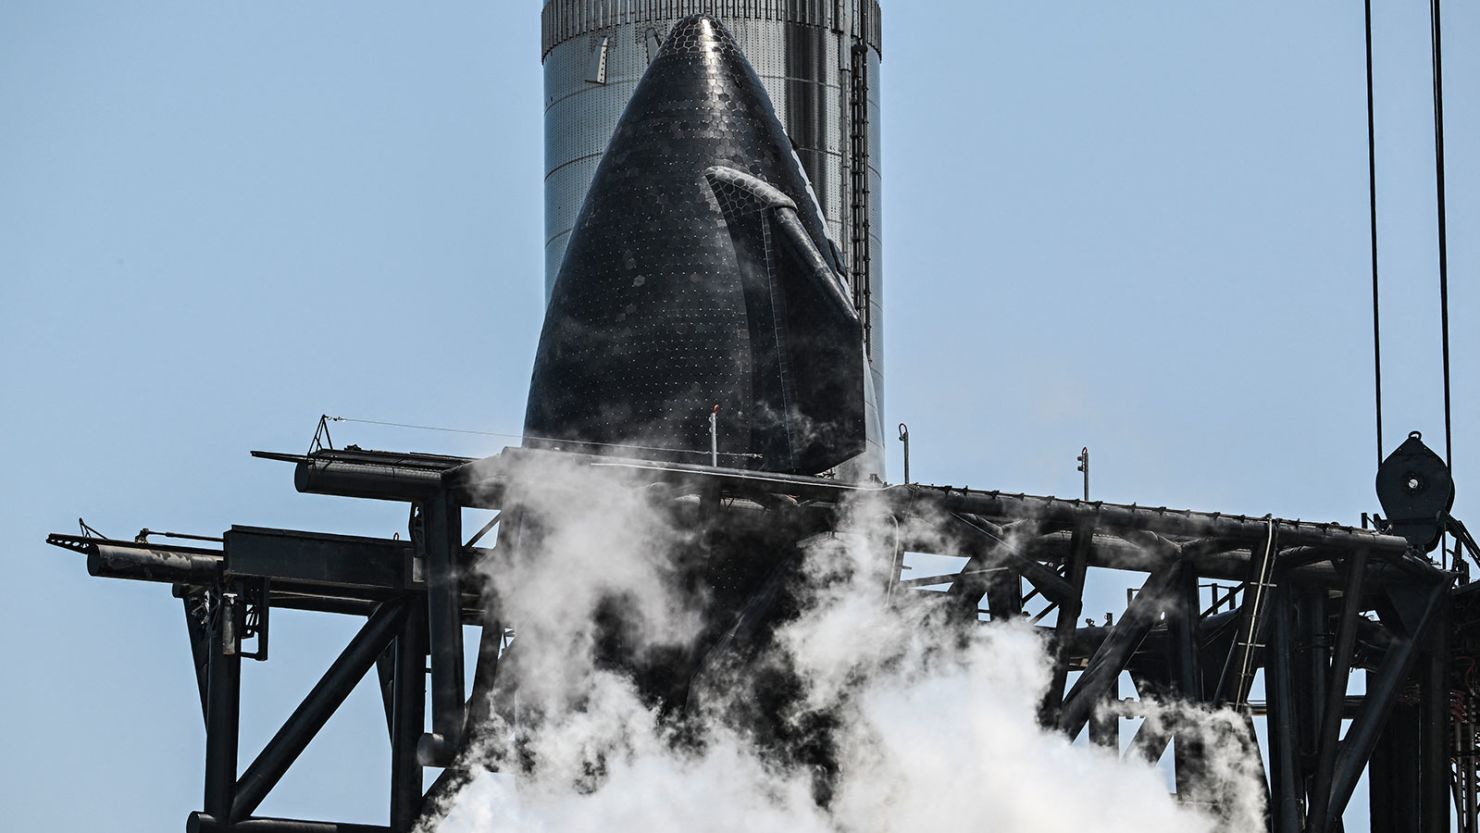 SpaceX's Starship is seen at Starbase in Boca Chica, Texas, on June 4 ahead of its fourth flight test.